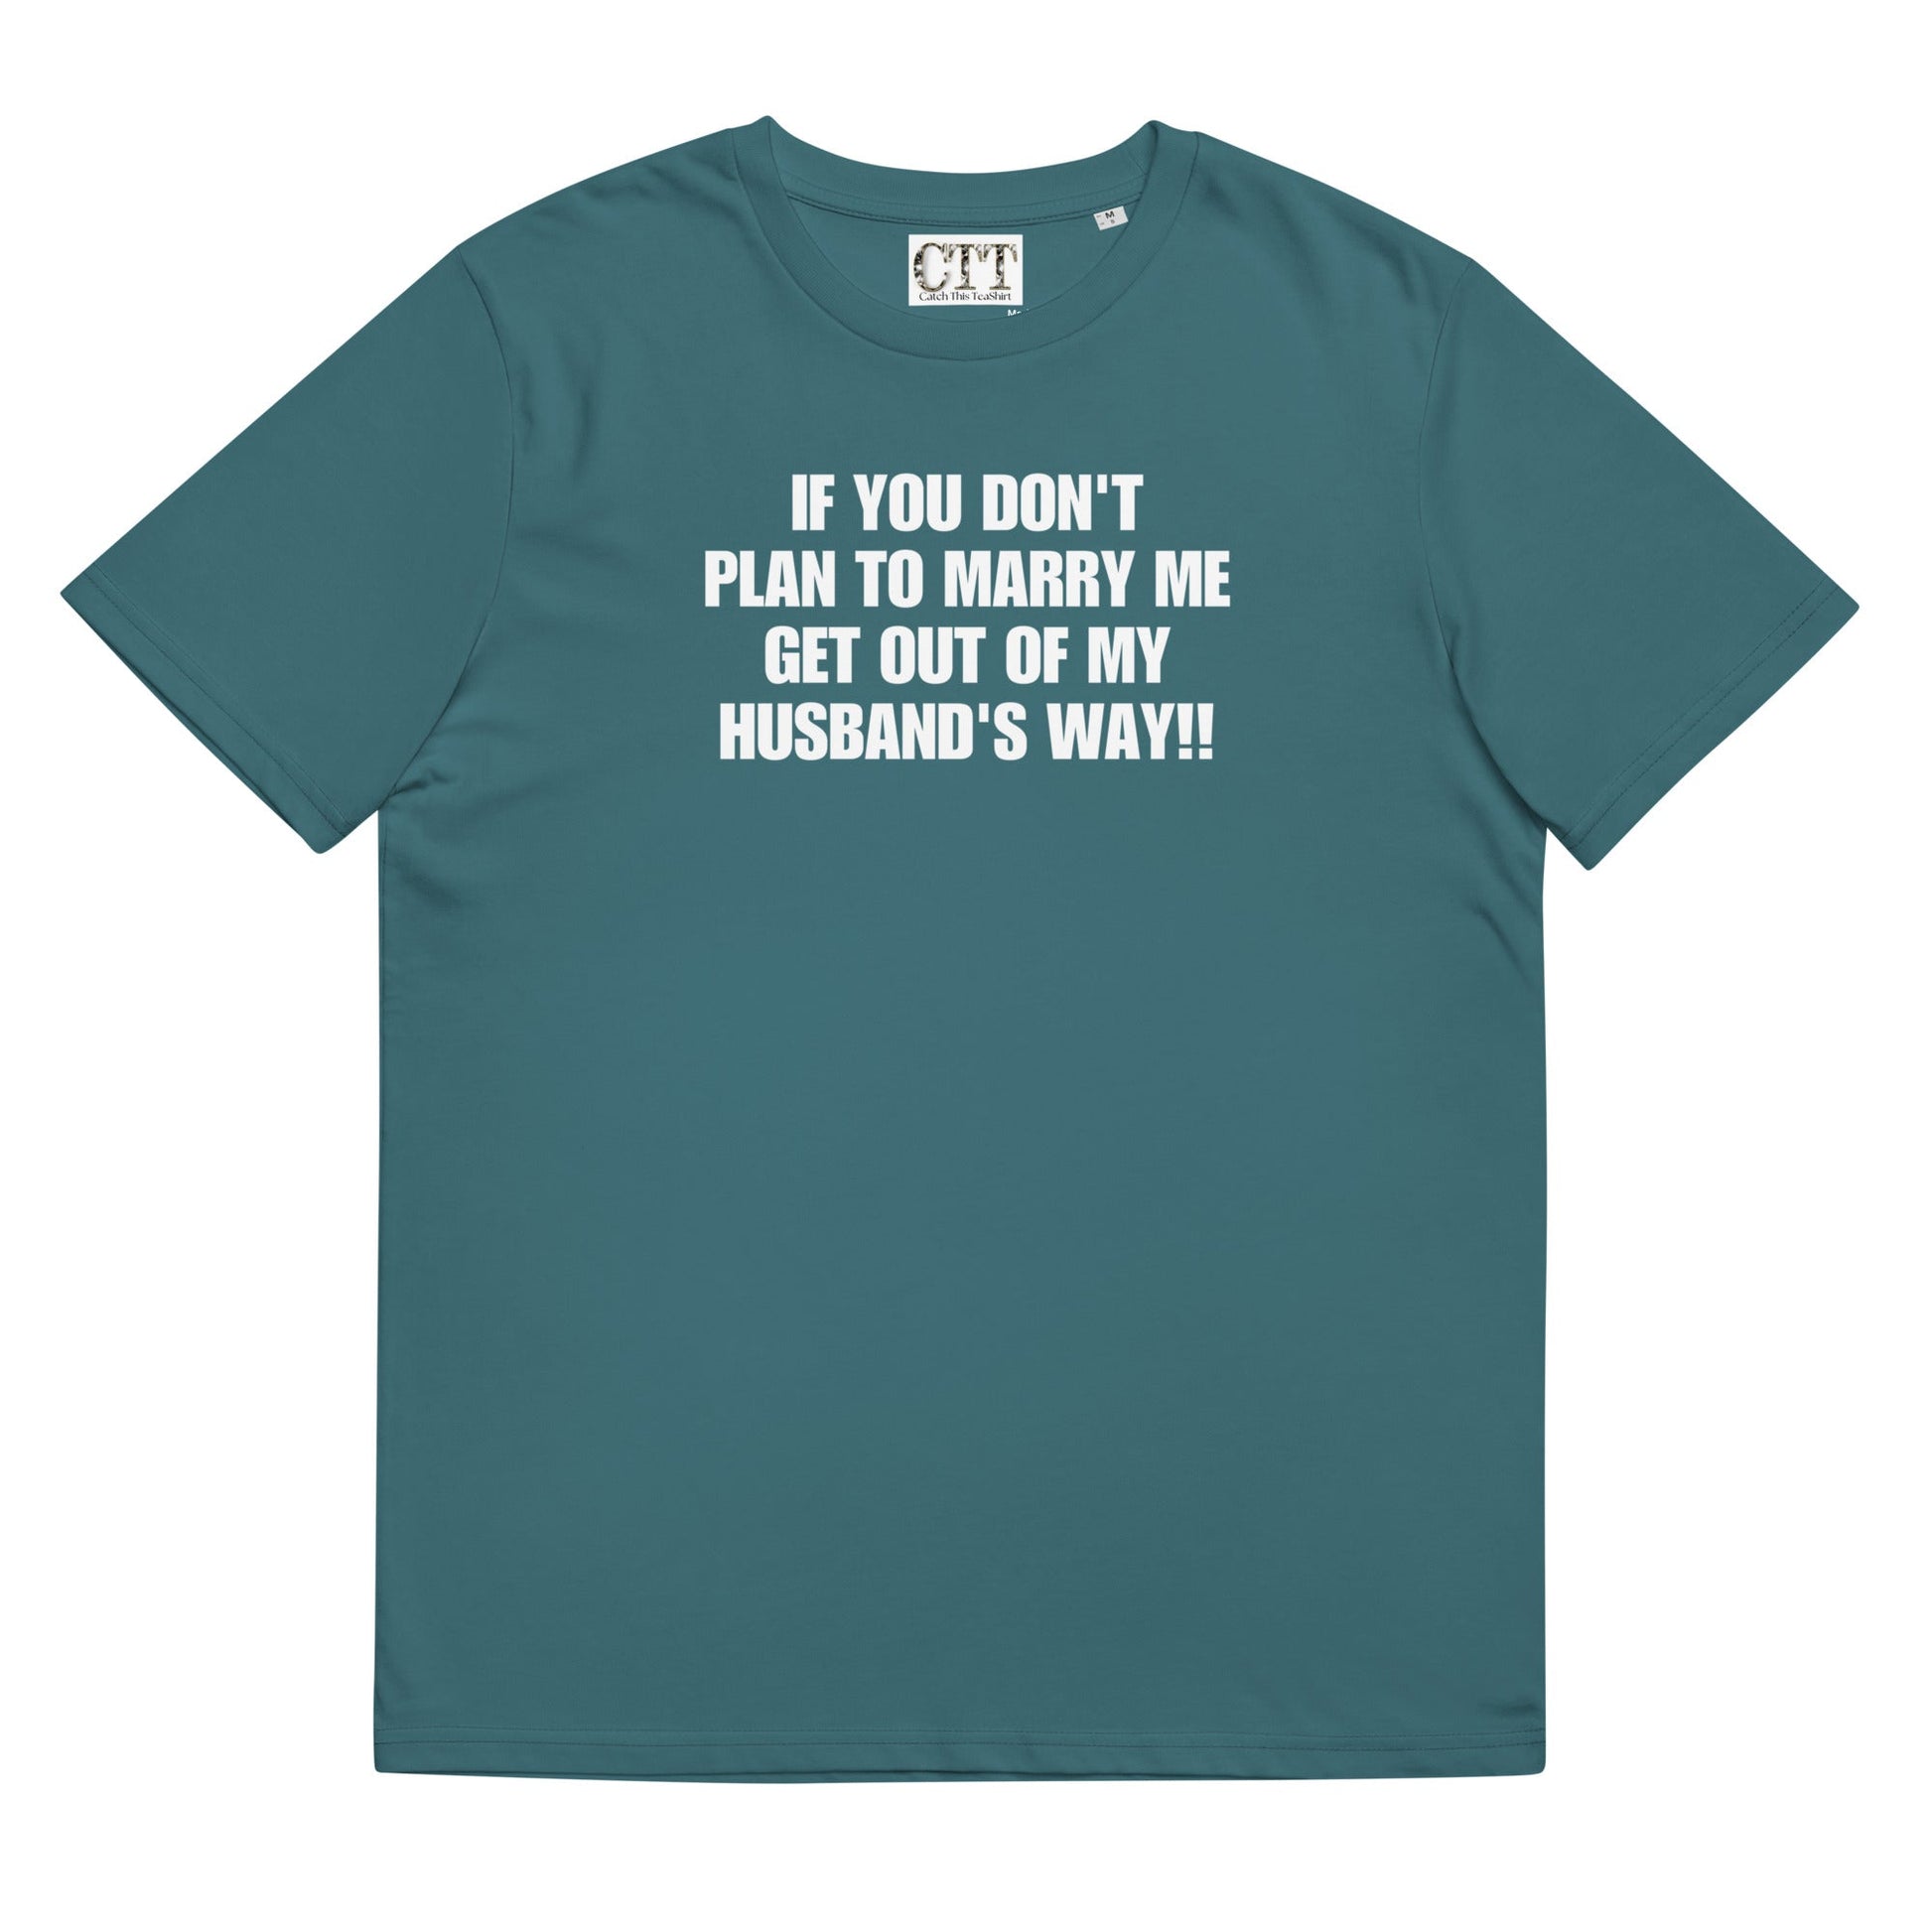 If You Don't Plan To Marry Me.. Get Out Of My Husband's Way | Organic Cotton T-shirt - Catch This Tea Shirts